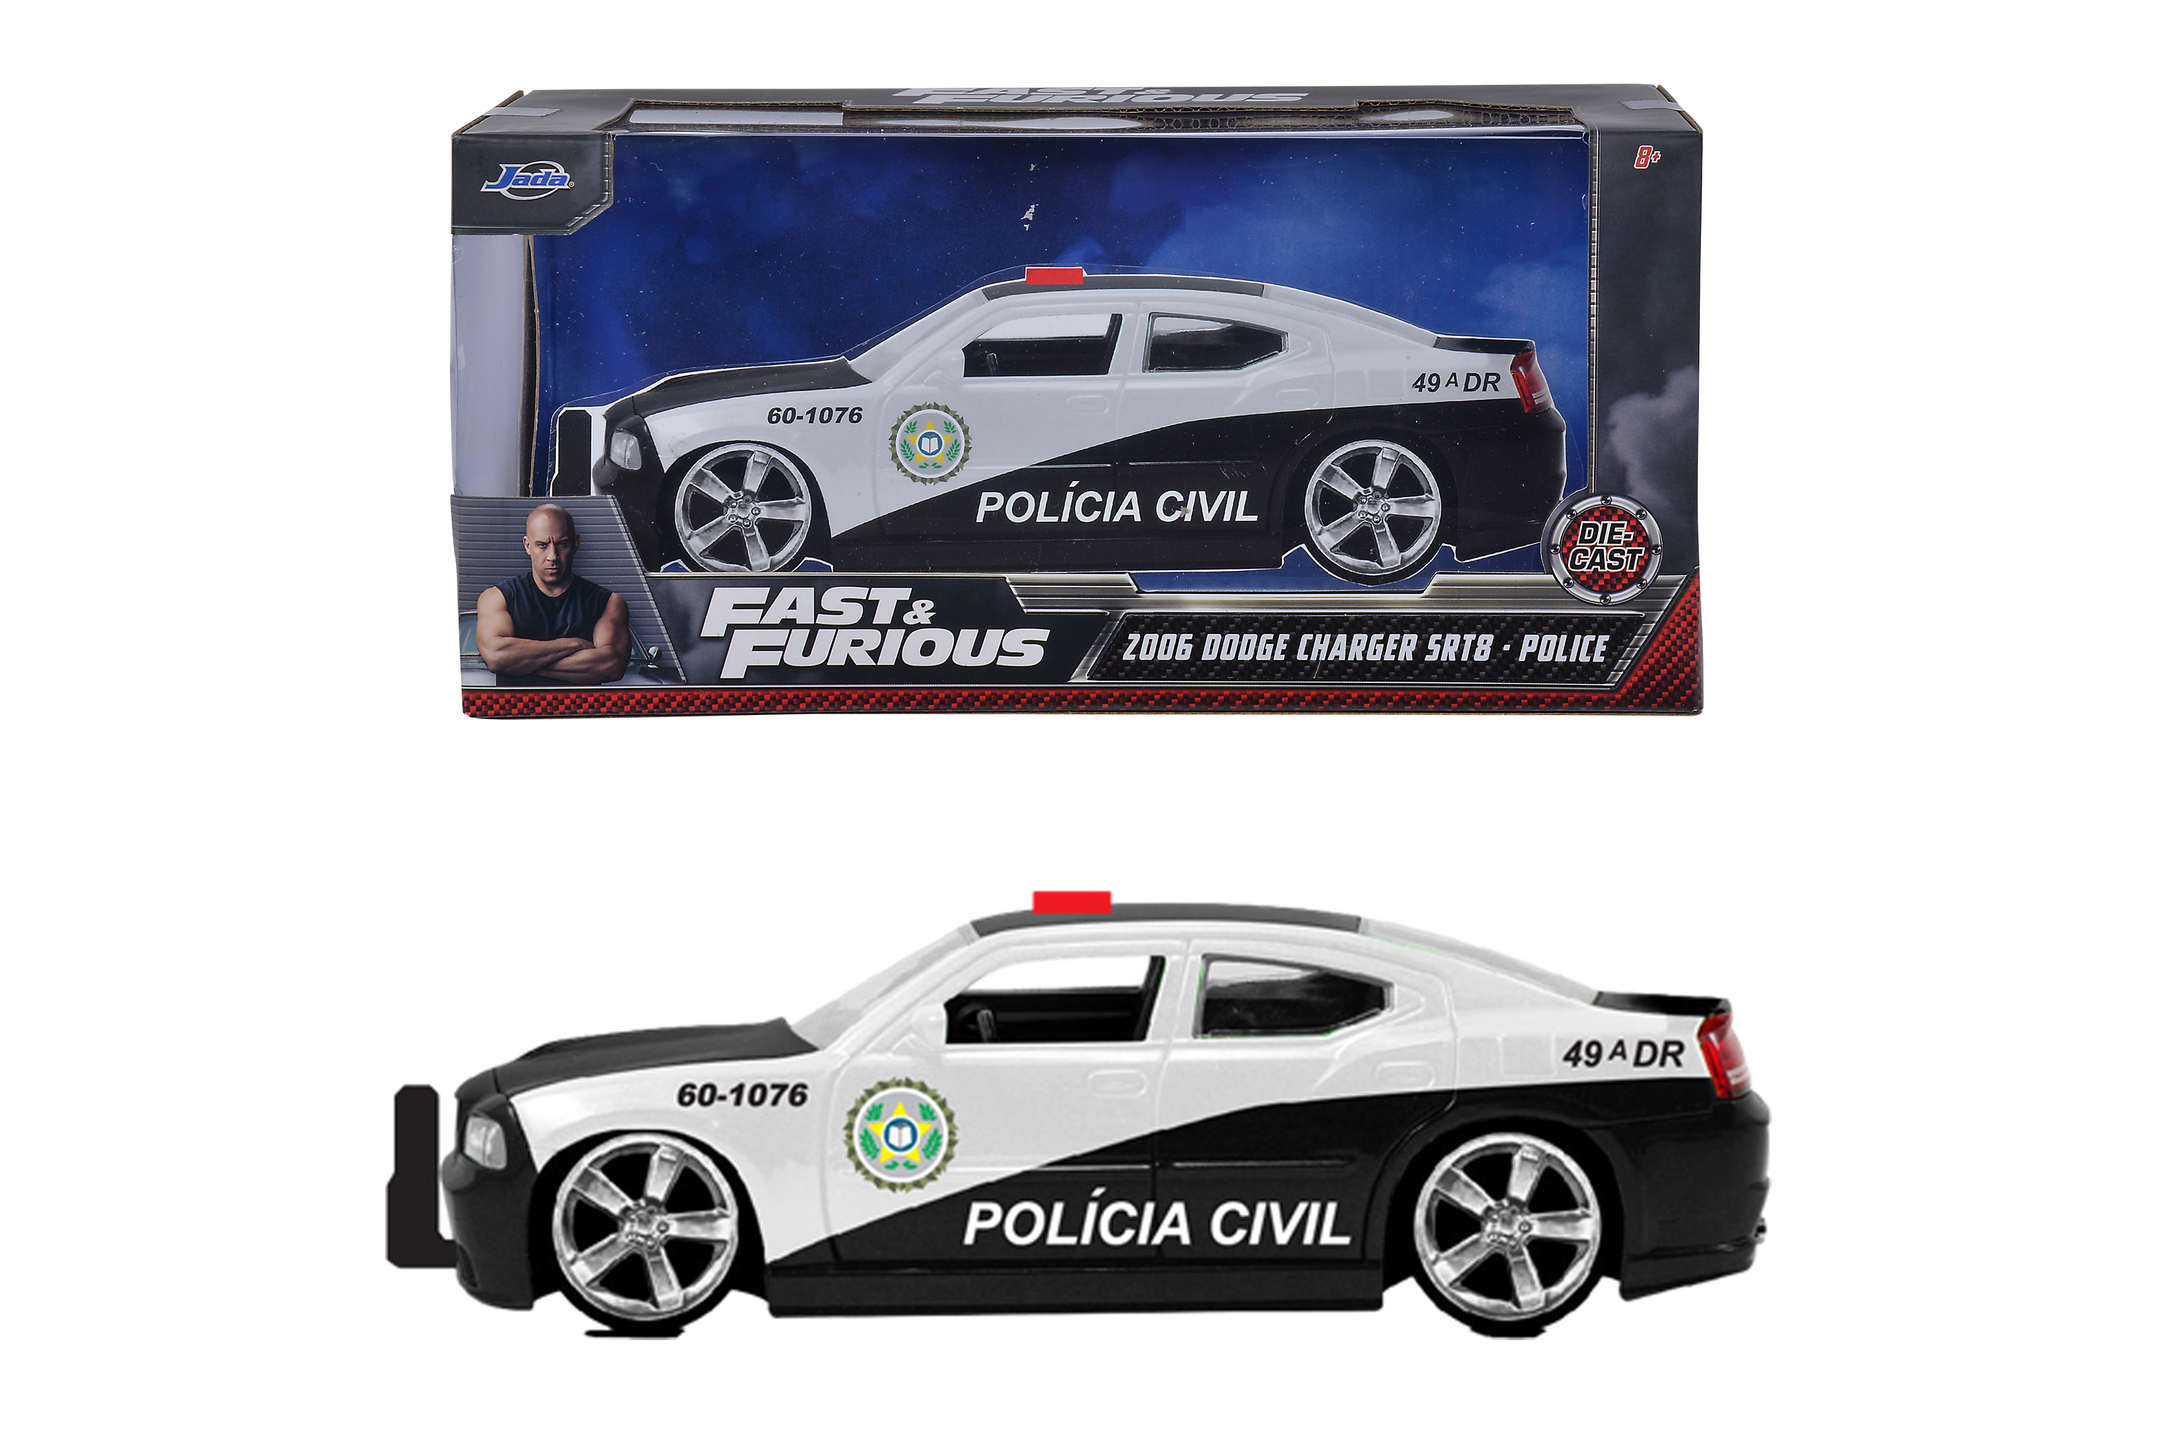 Fast & Furious 2006 Dodge Charger Police 1:24